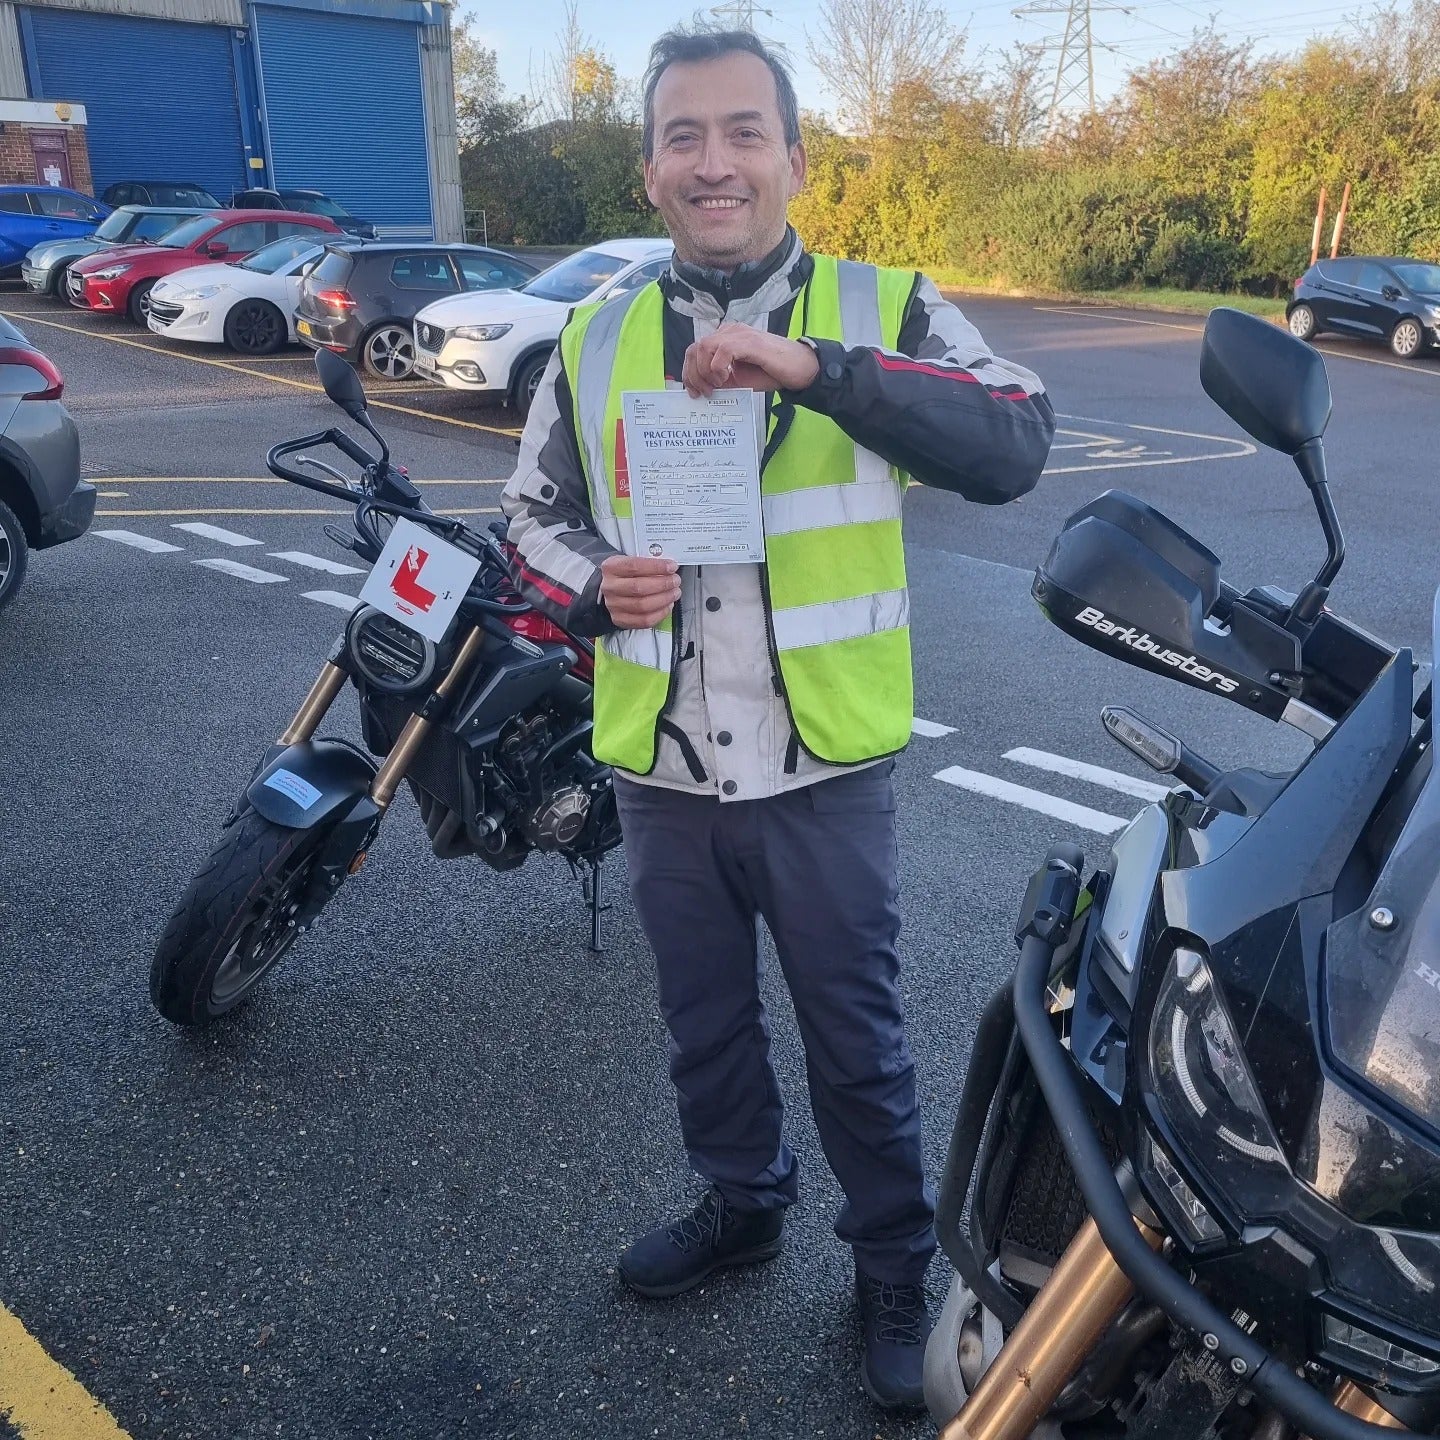 Motorcycle Training in Bournemouth, Motorcycle Training in Dorset, Book your CBT, Full License Motorbike License, Honda of Bournemouth